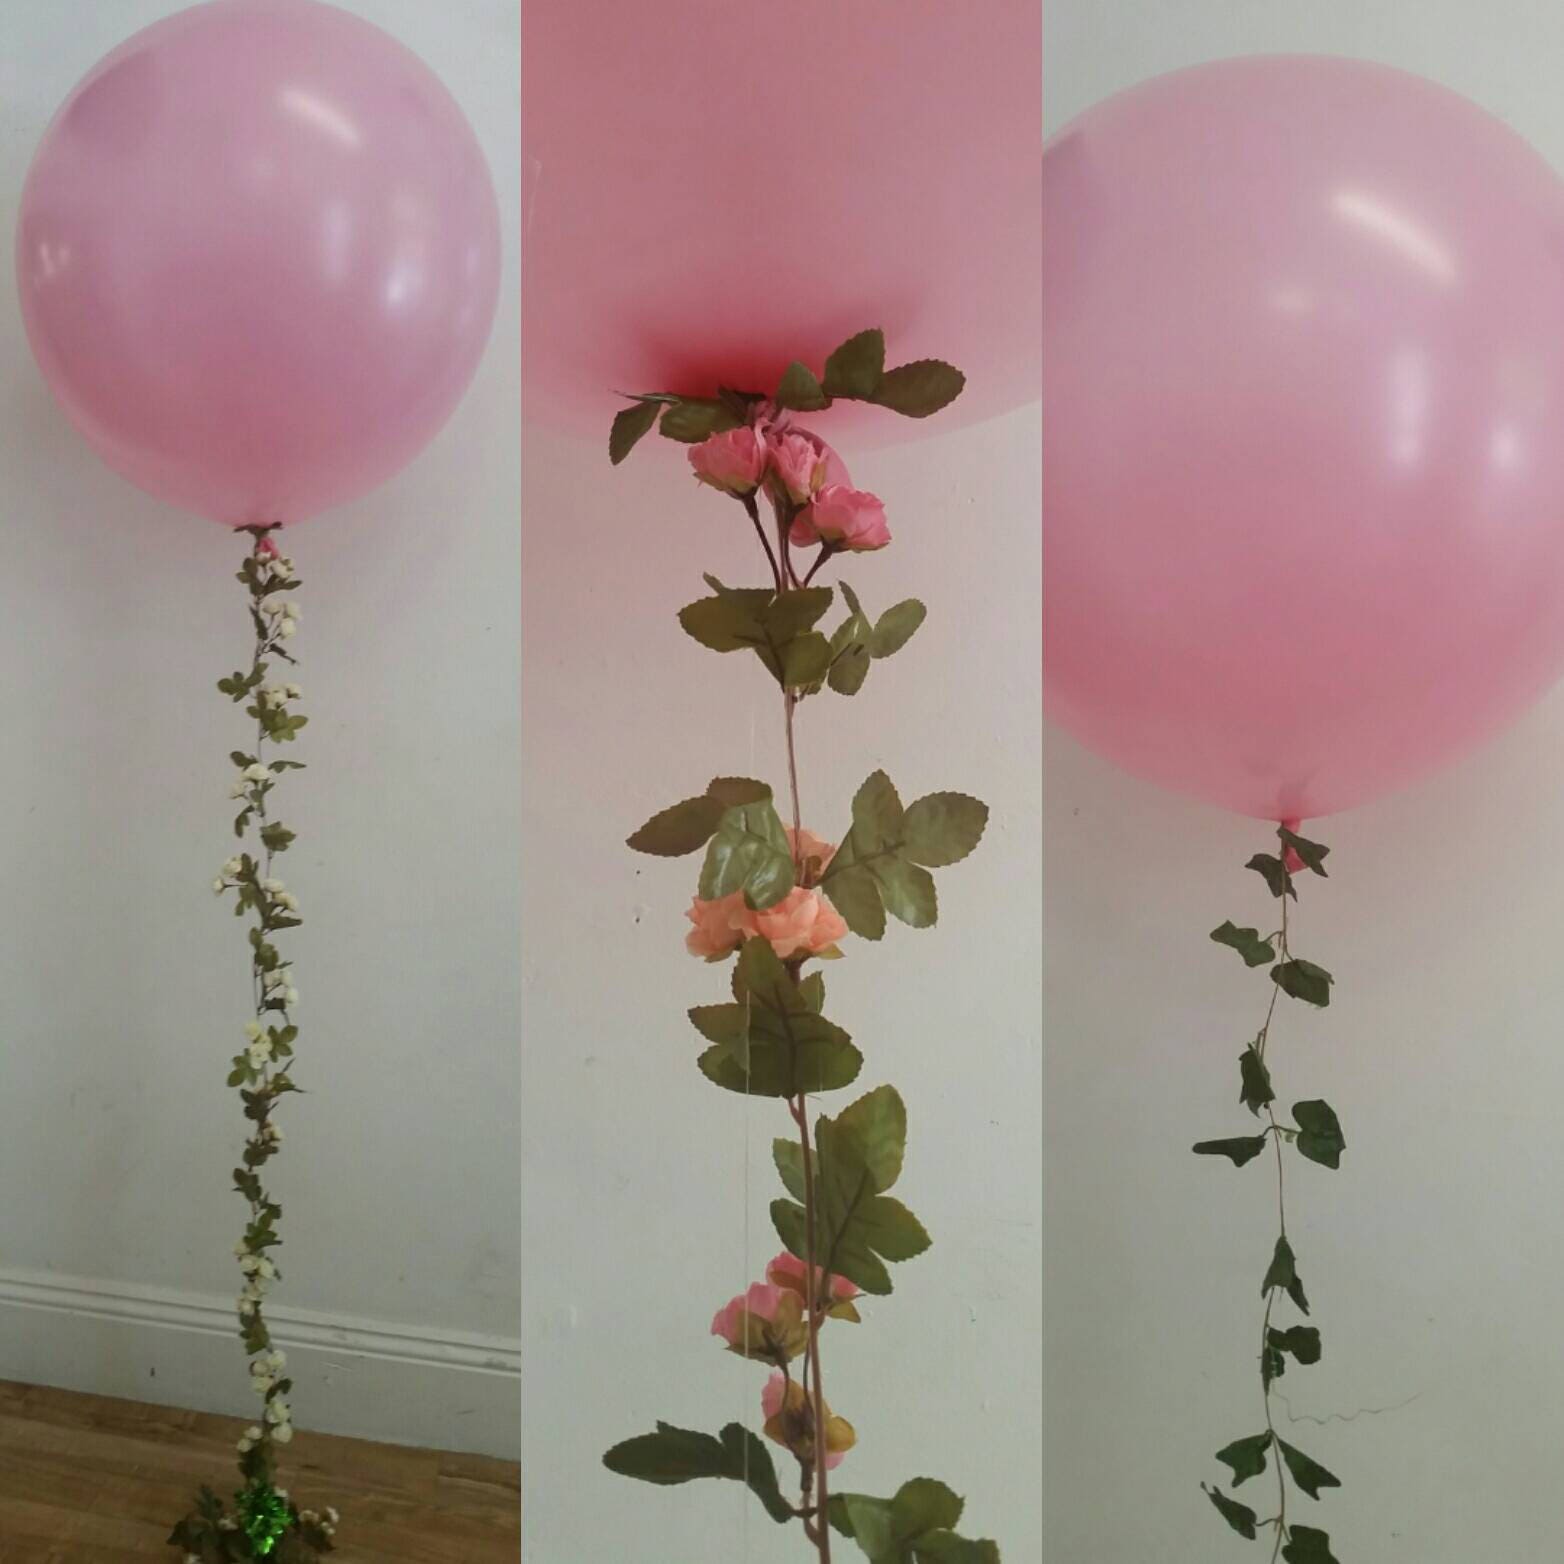 Vines for Balloons -  Canada